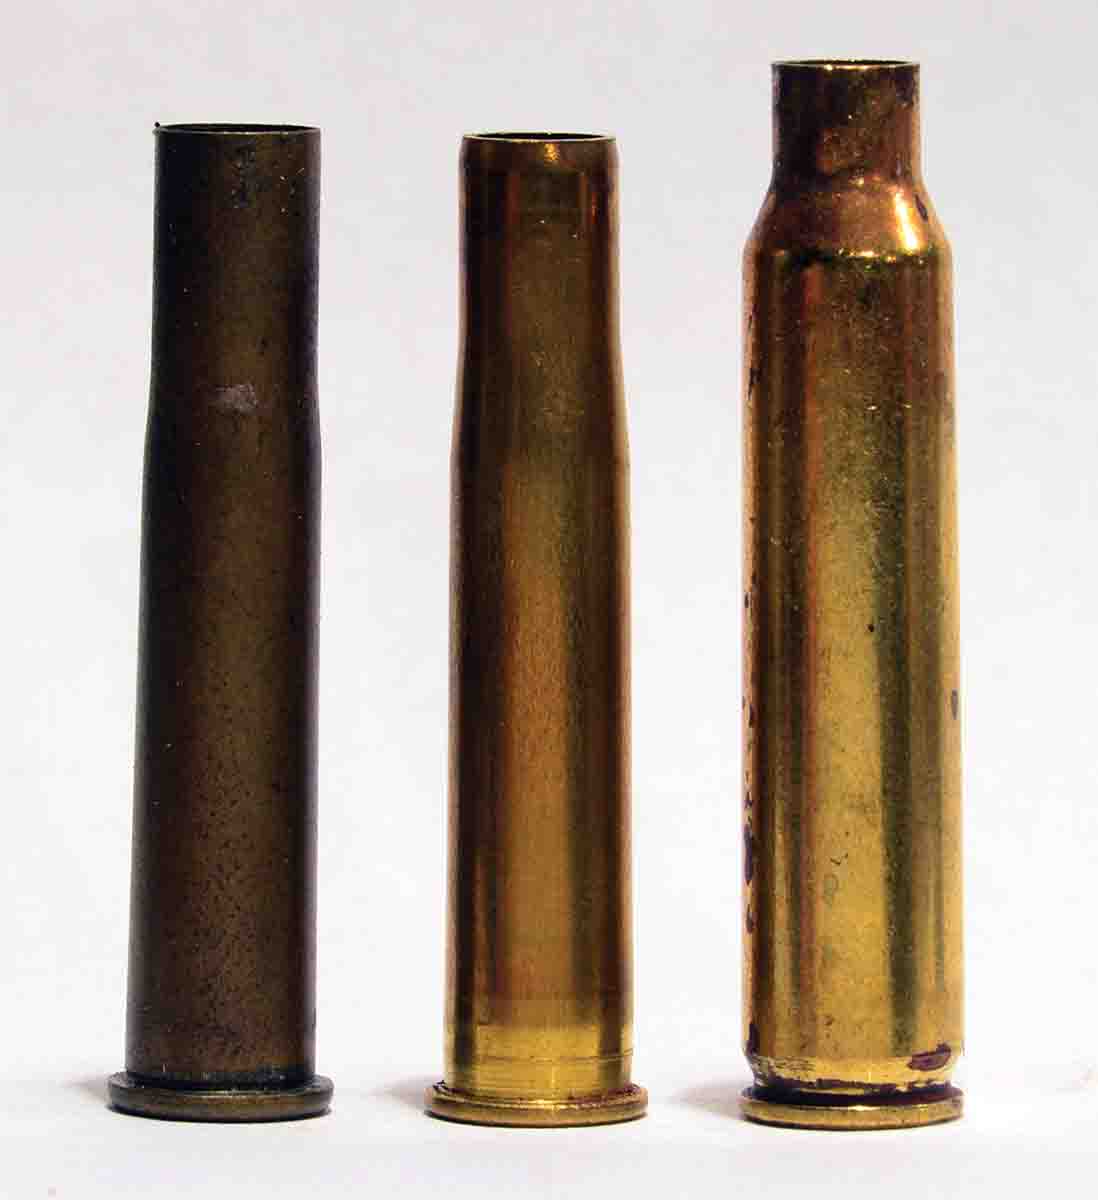 At left is an original .25-20 SS case beside a (center) re-formed Hayley case and a (right) .223 Remington, from which it is swaged. Drastic resizing occurs, resulting in some dimensional anomalies. Note how the mouth of the formed case turns inward. This must be corrected before sizing and loading.